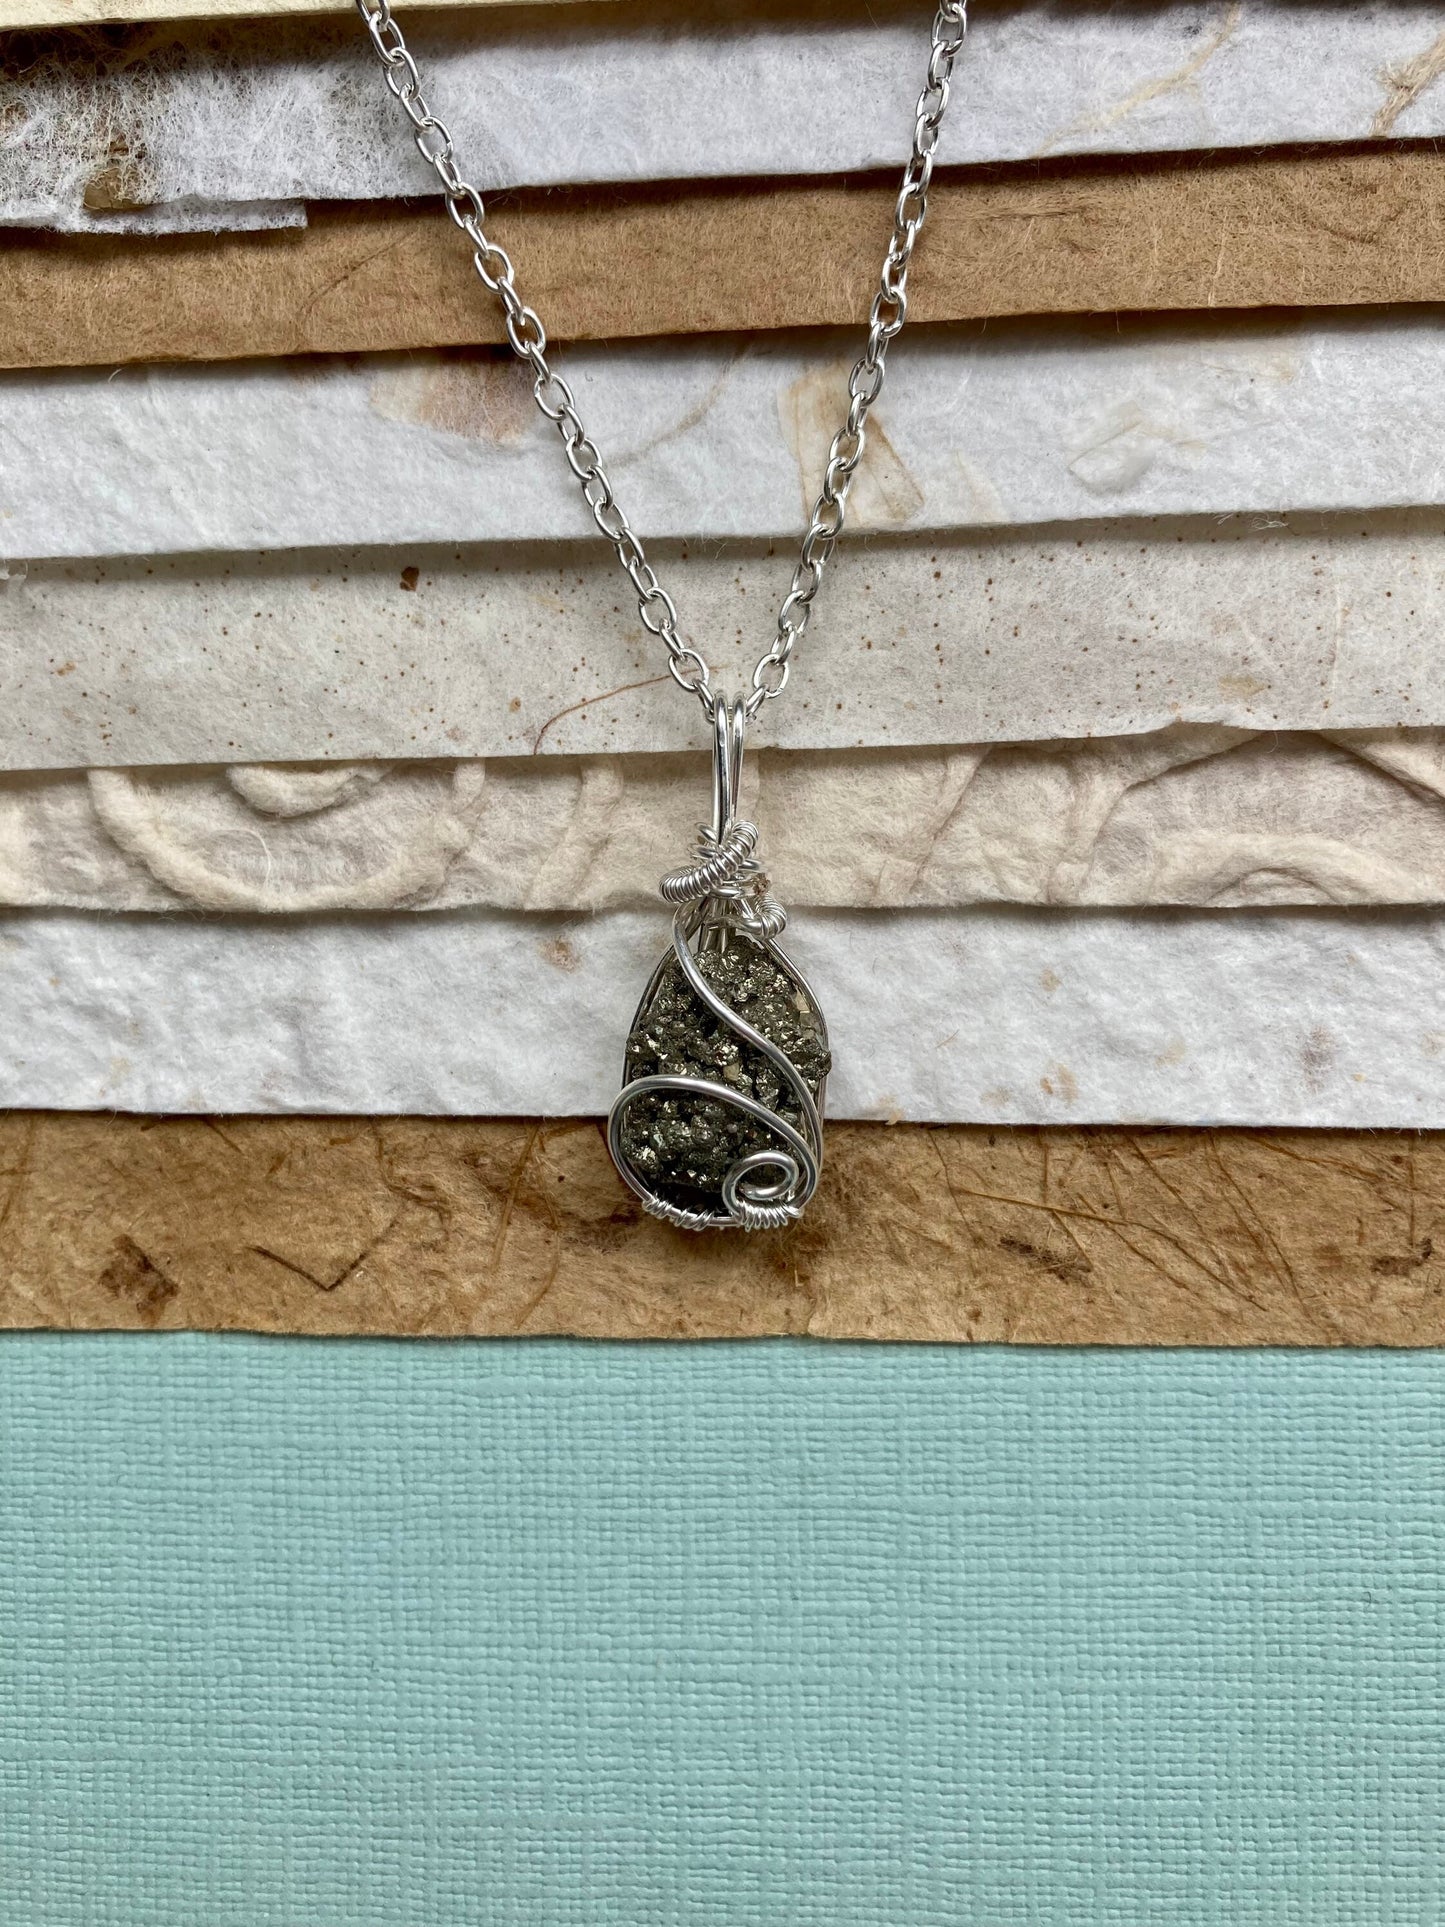 Pyrite necklace silver plated wire wrapped 18 inch length chain